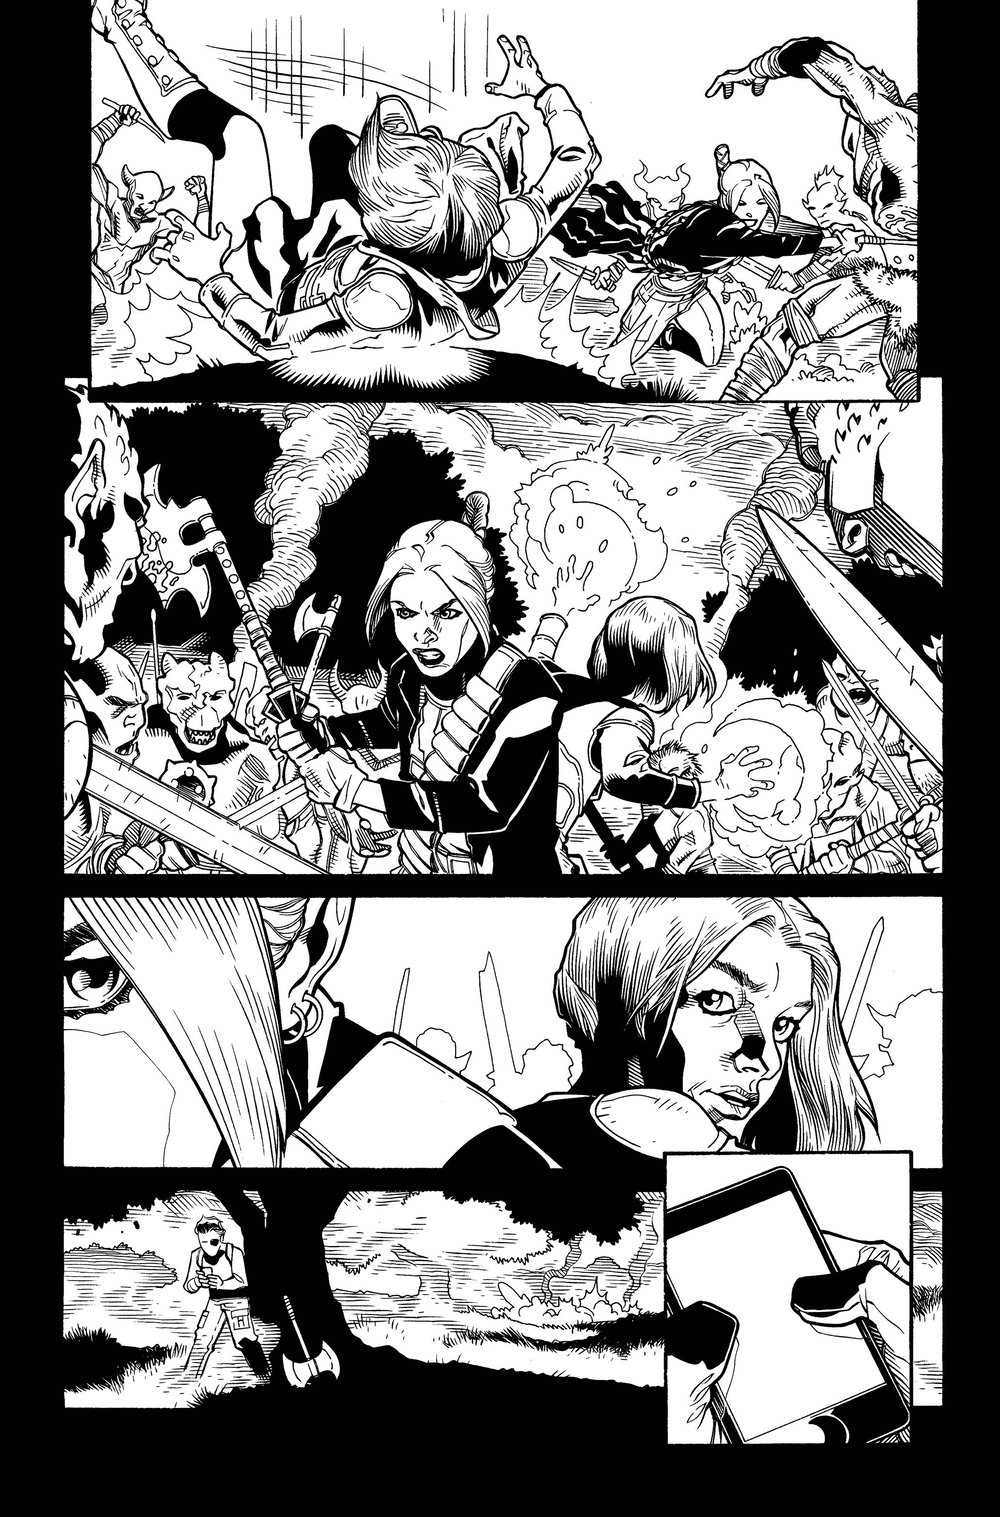 Image of Buffy S9 22pg4.